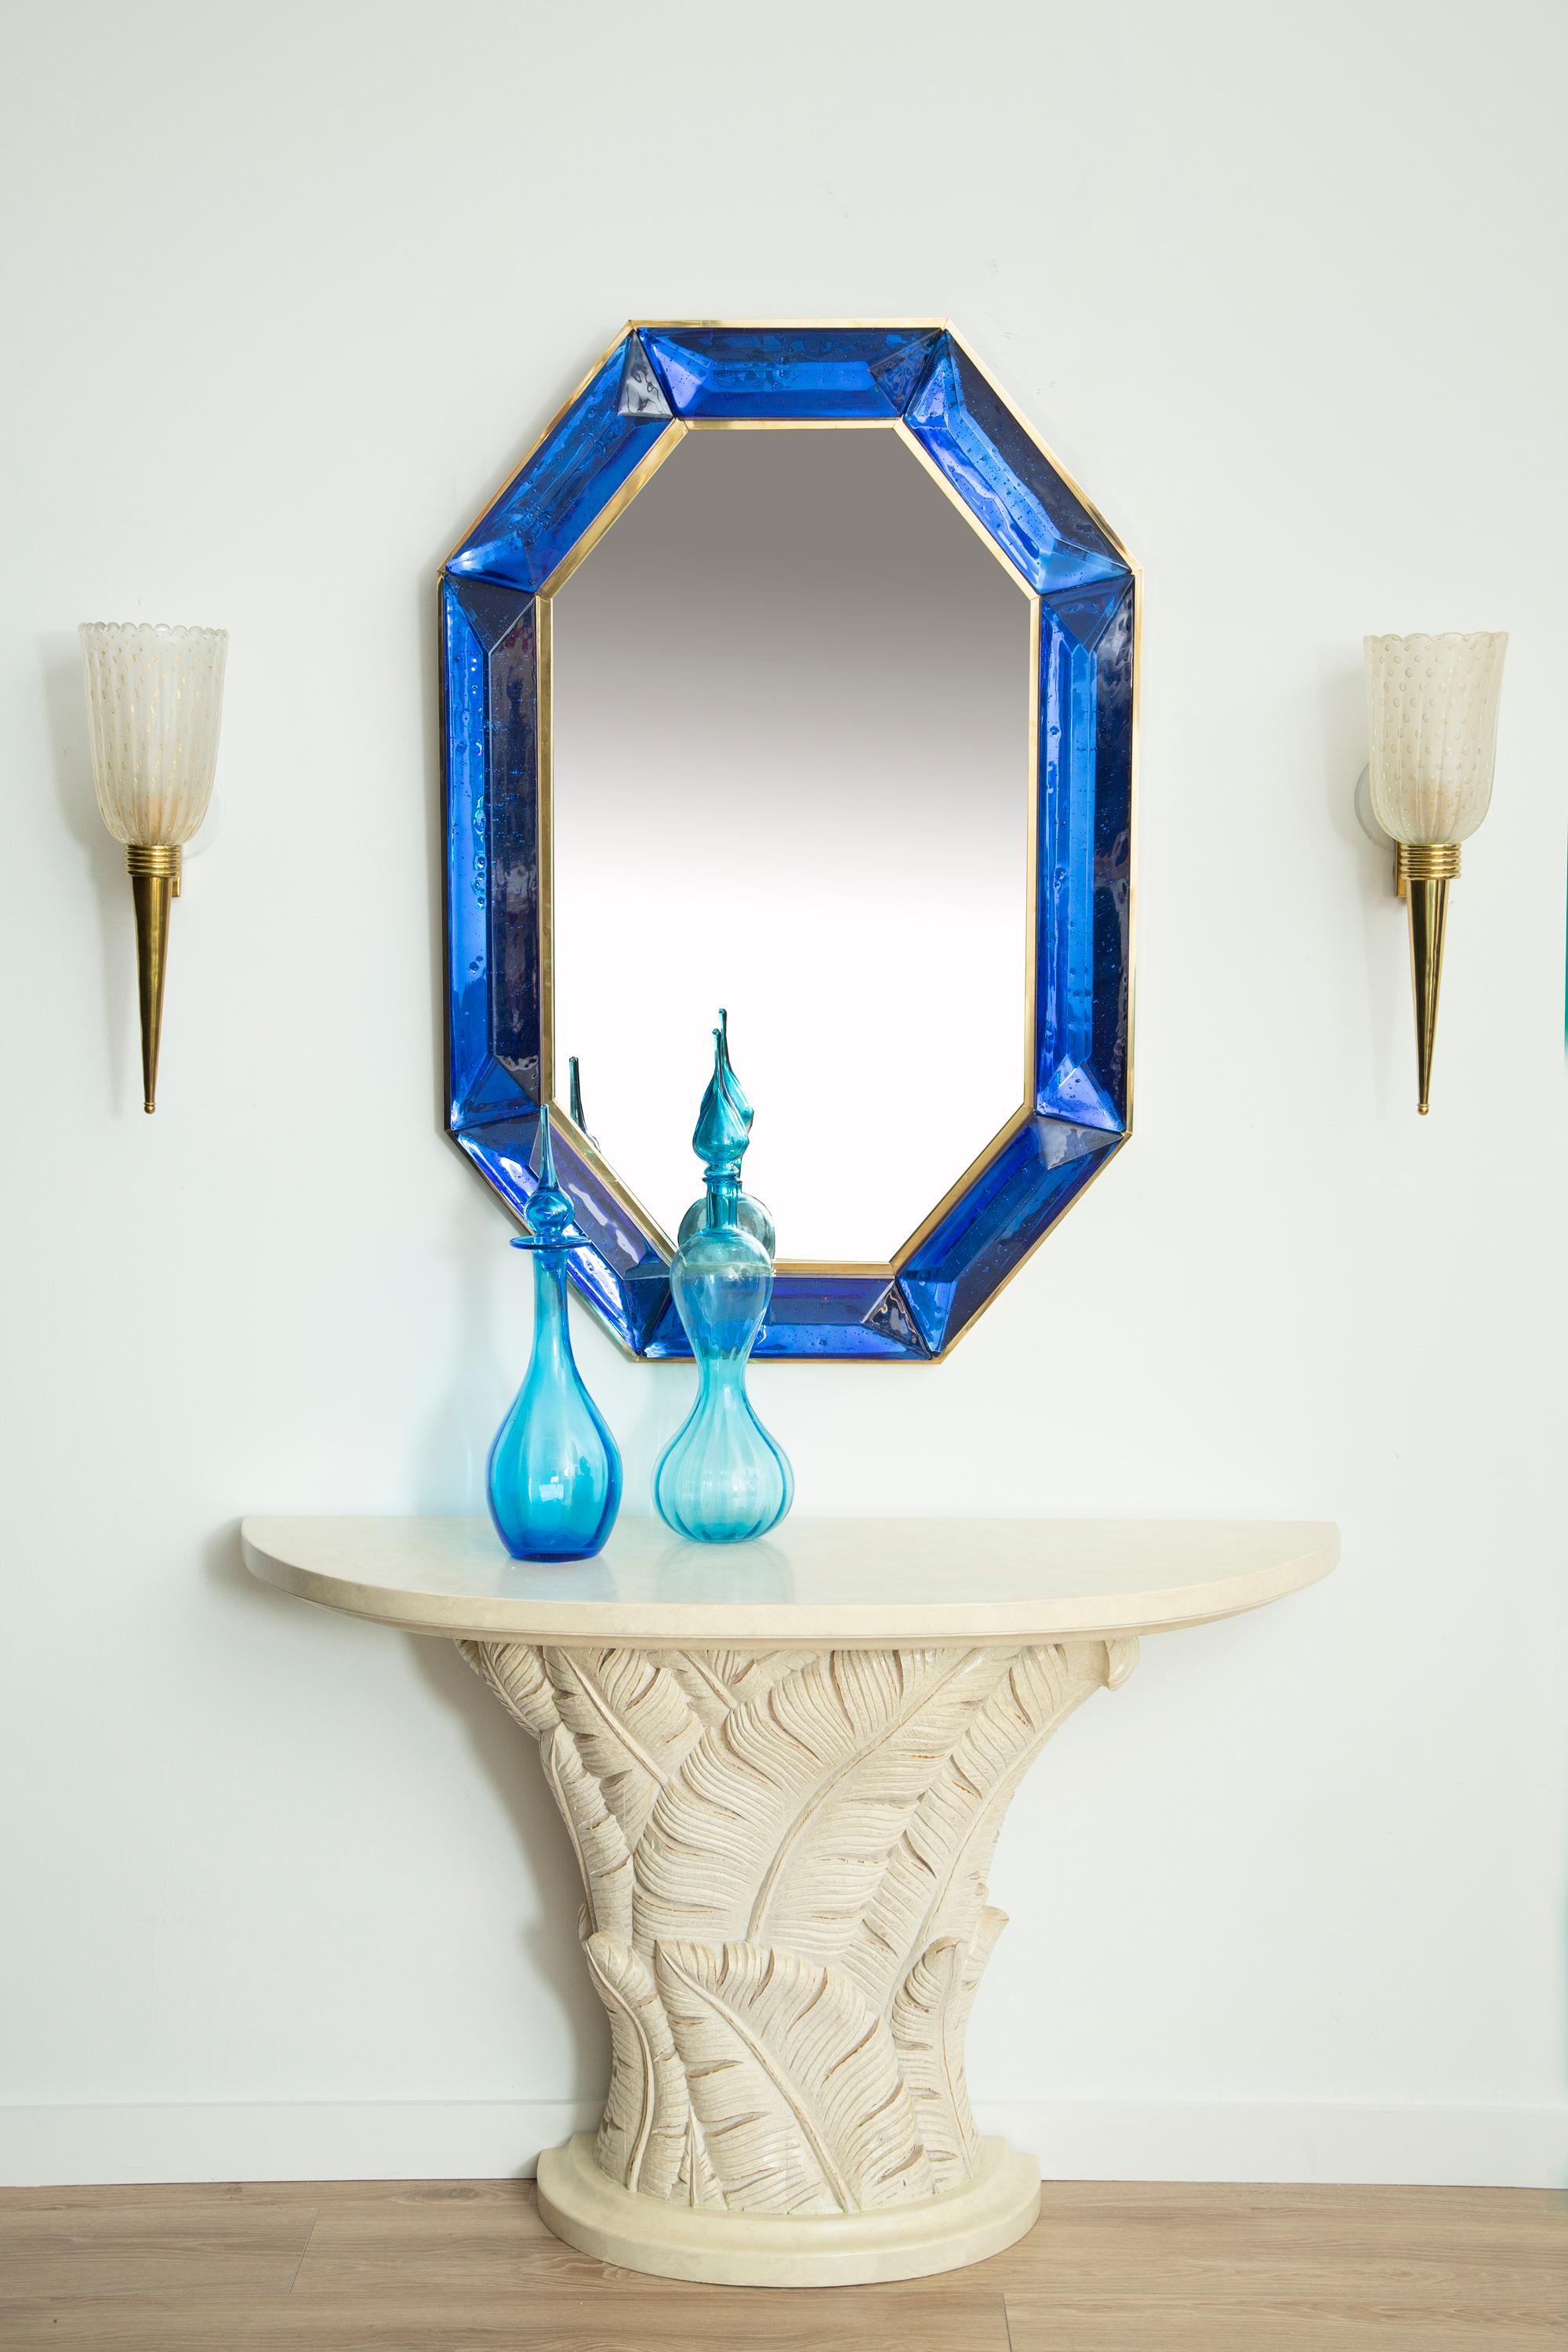 Pair of bespoke octagon cobalt blue Murano glass mirror, in stock
 Vivid and intense cobalt blue glass block with naturally occurring air inclusions throughout 
 Highly polished faceted pattern
 Brass gallery all around
 Each mirror is a unique